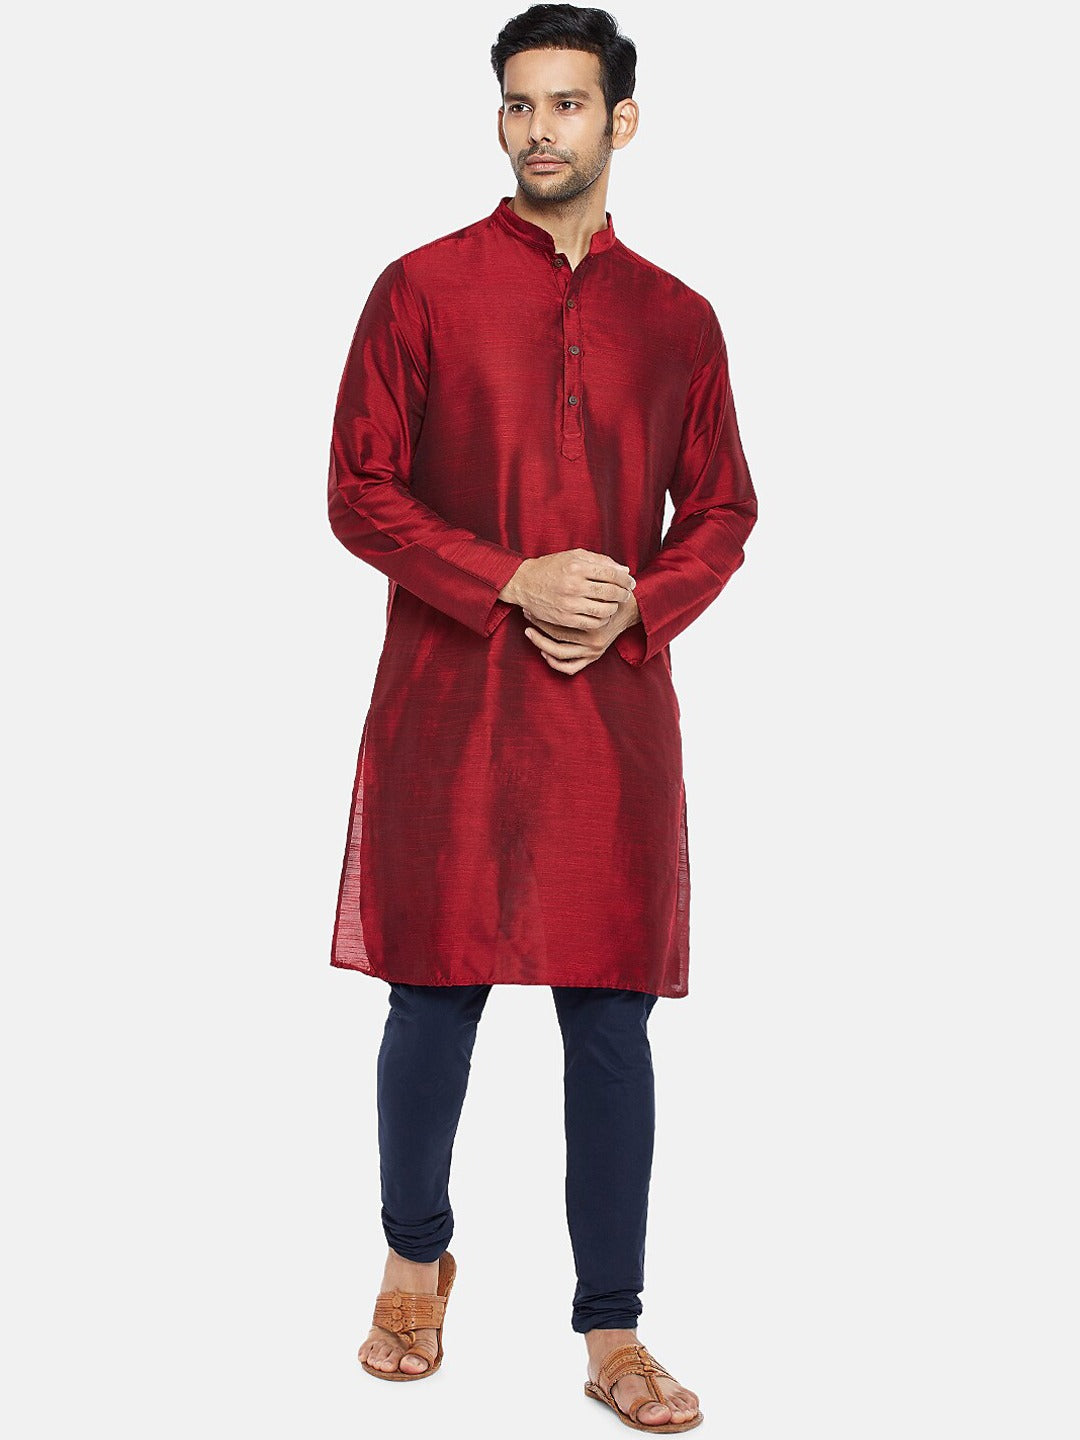 Blue Solid Pure Cotton Churidar Indian Clothing in Denver, CO, Aurora, CO, Boulder, CO, Fort Collins, CO, Colorado Springs, CO, Parker, CO, Highlands Ranch, CO, Cherry Creek, CO, Centennial, CO, and Longmont, CO. NATIONWIDE SHIPPING USA- India Fashion X